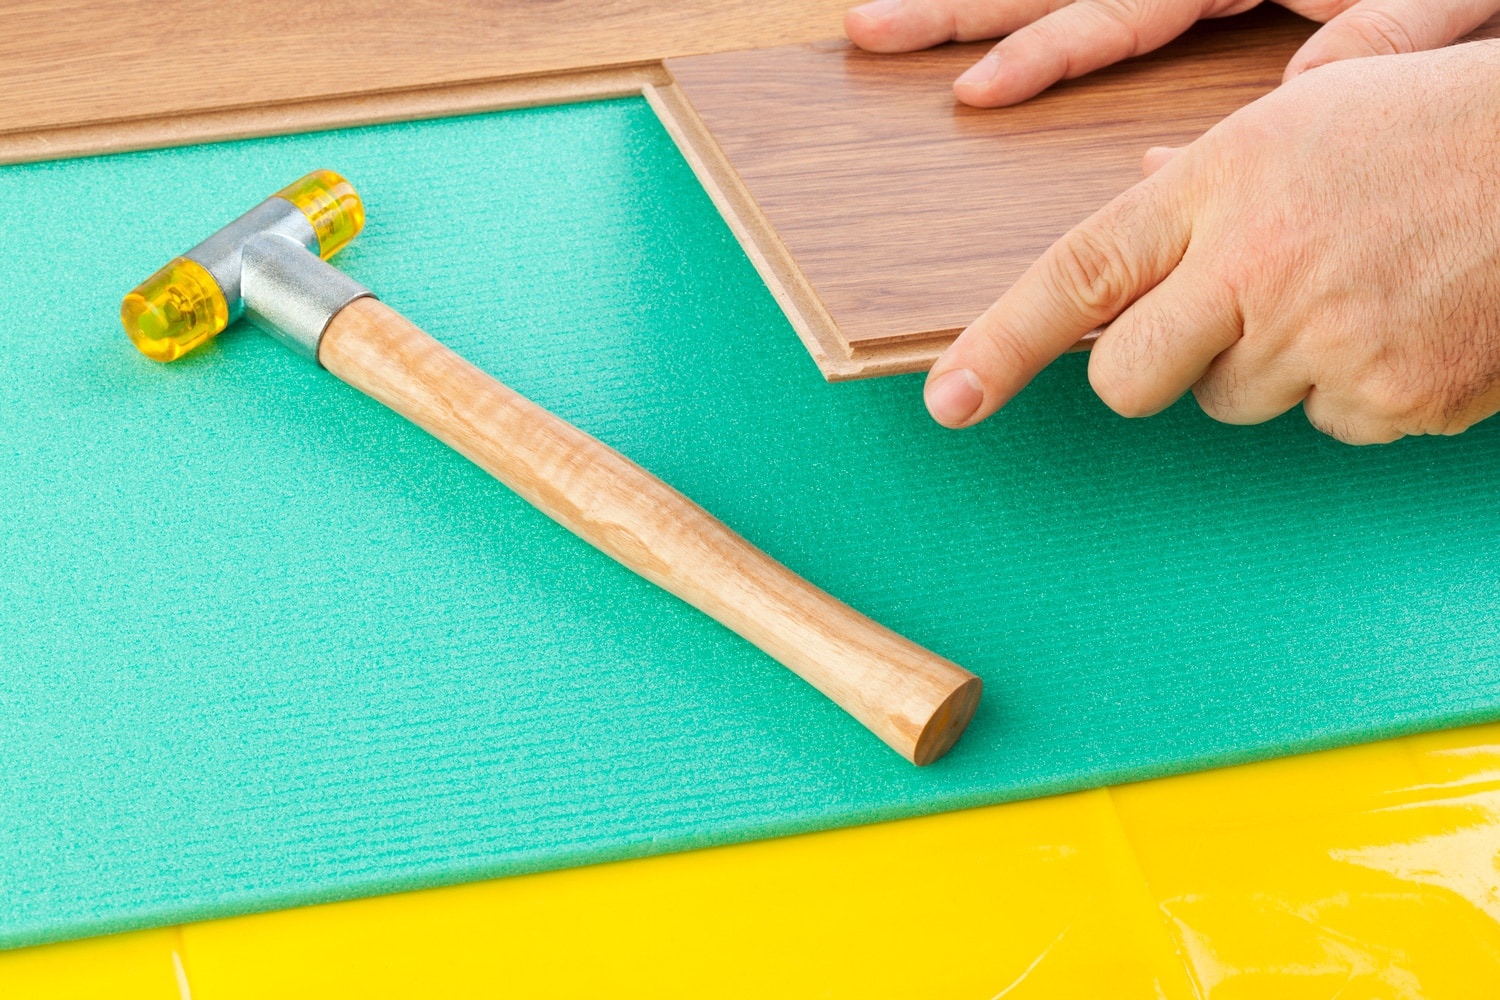 Laying Laminate Flooring. Yellow film vapor barrier and green foam underlayments. Person's hand seen putting the planks together.